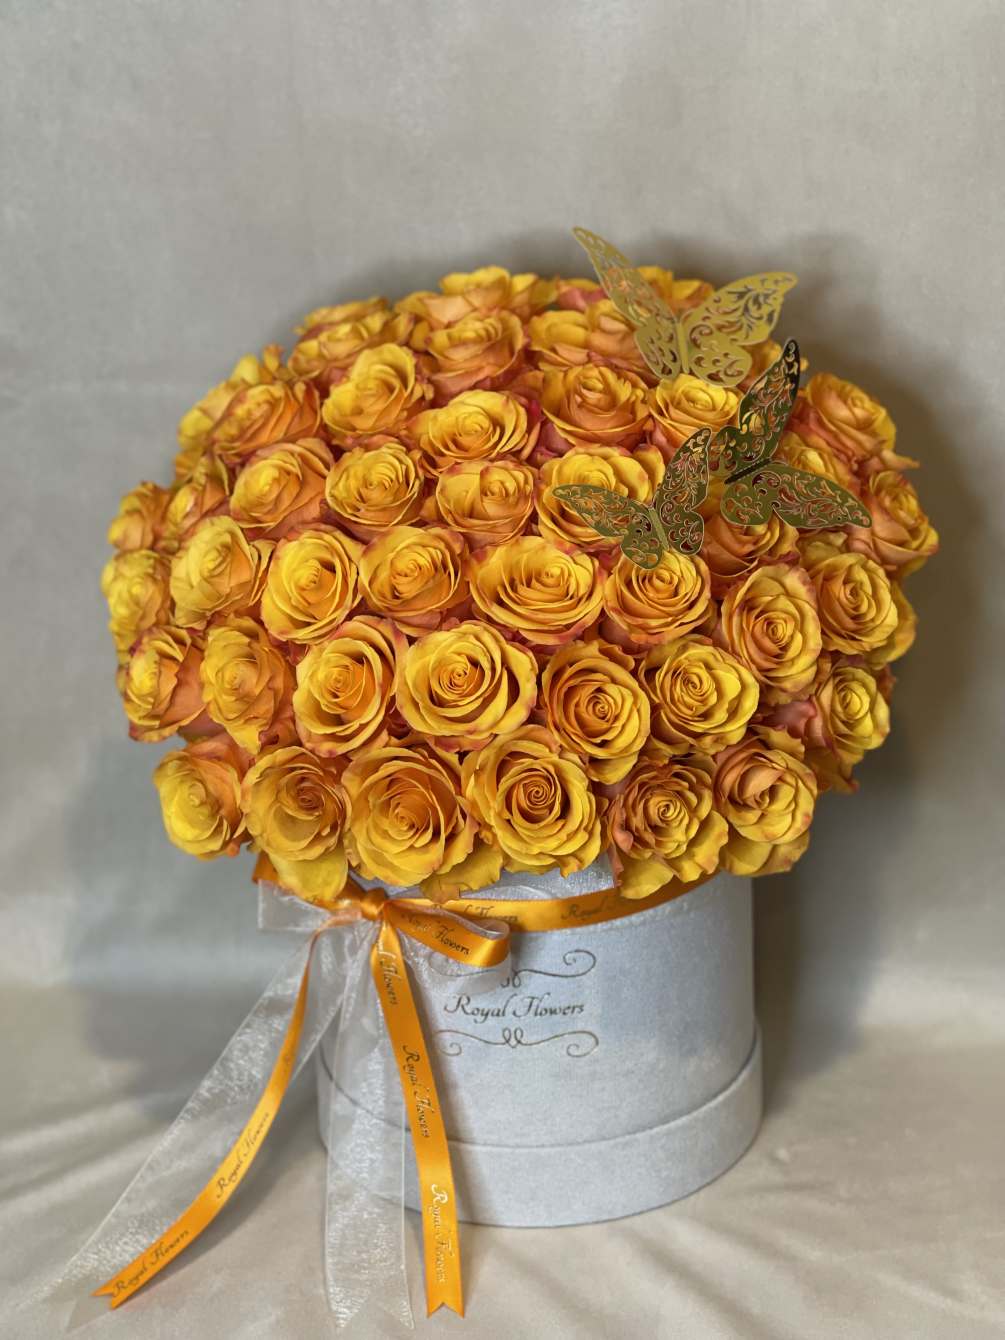 50 high quality roses in a box with golden butterflies are ready